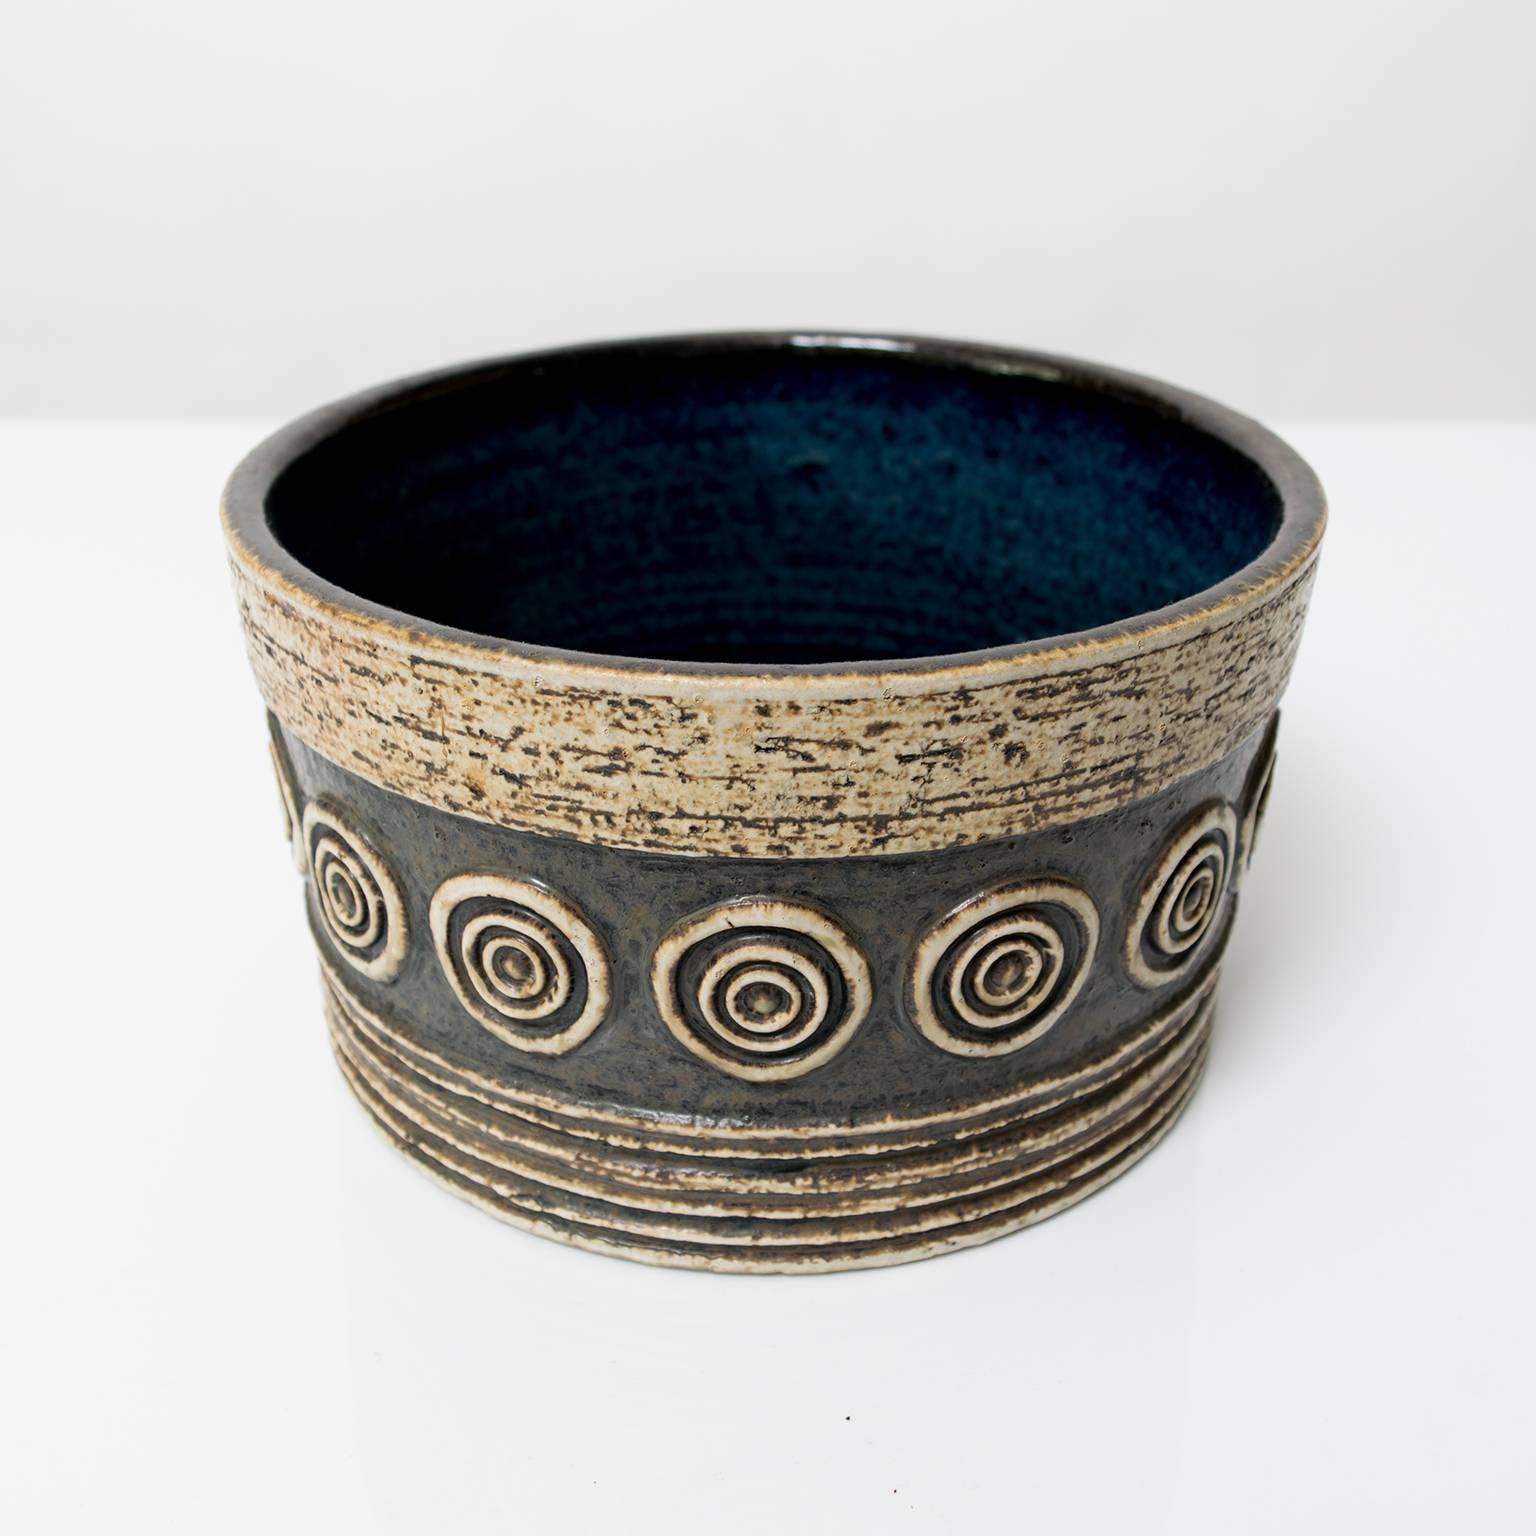 A Scandinavian Modern studio bowl by Britt-Louise Sundell for Gustavsberg, circa 1960. This piece is highly textured with horizontal grooves, circles and glazed in earthy, neutral colors and a deep blue inside.
Measures:
Height: